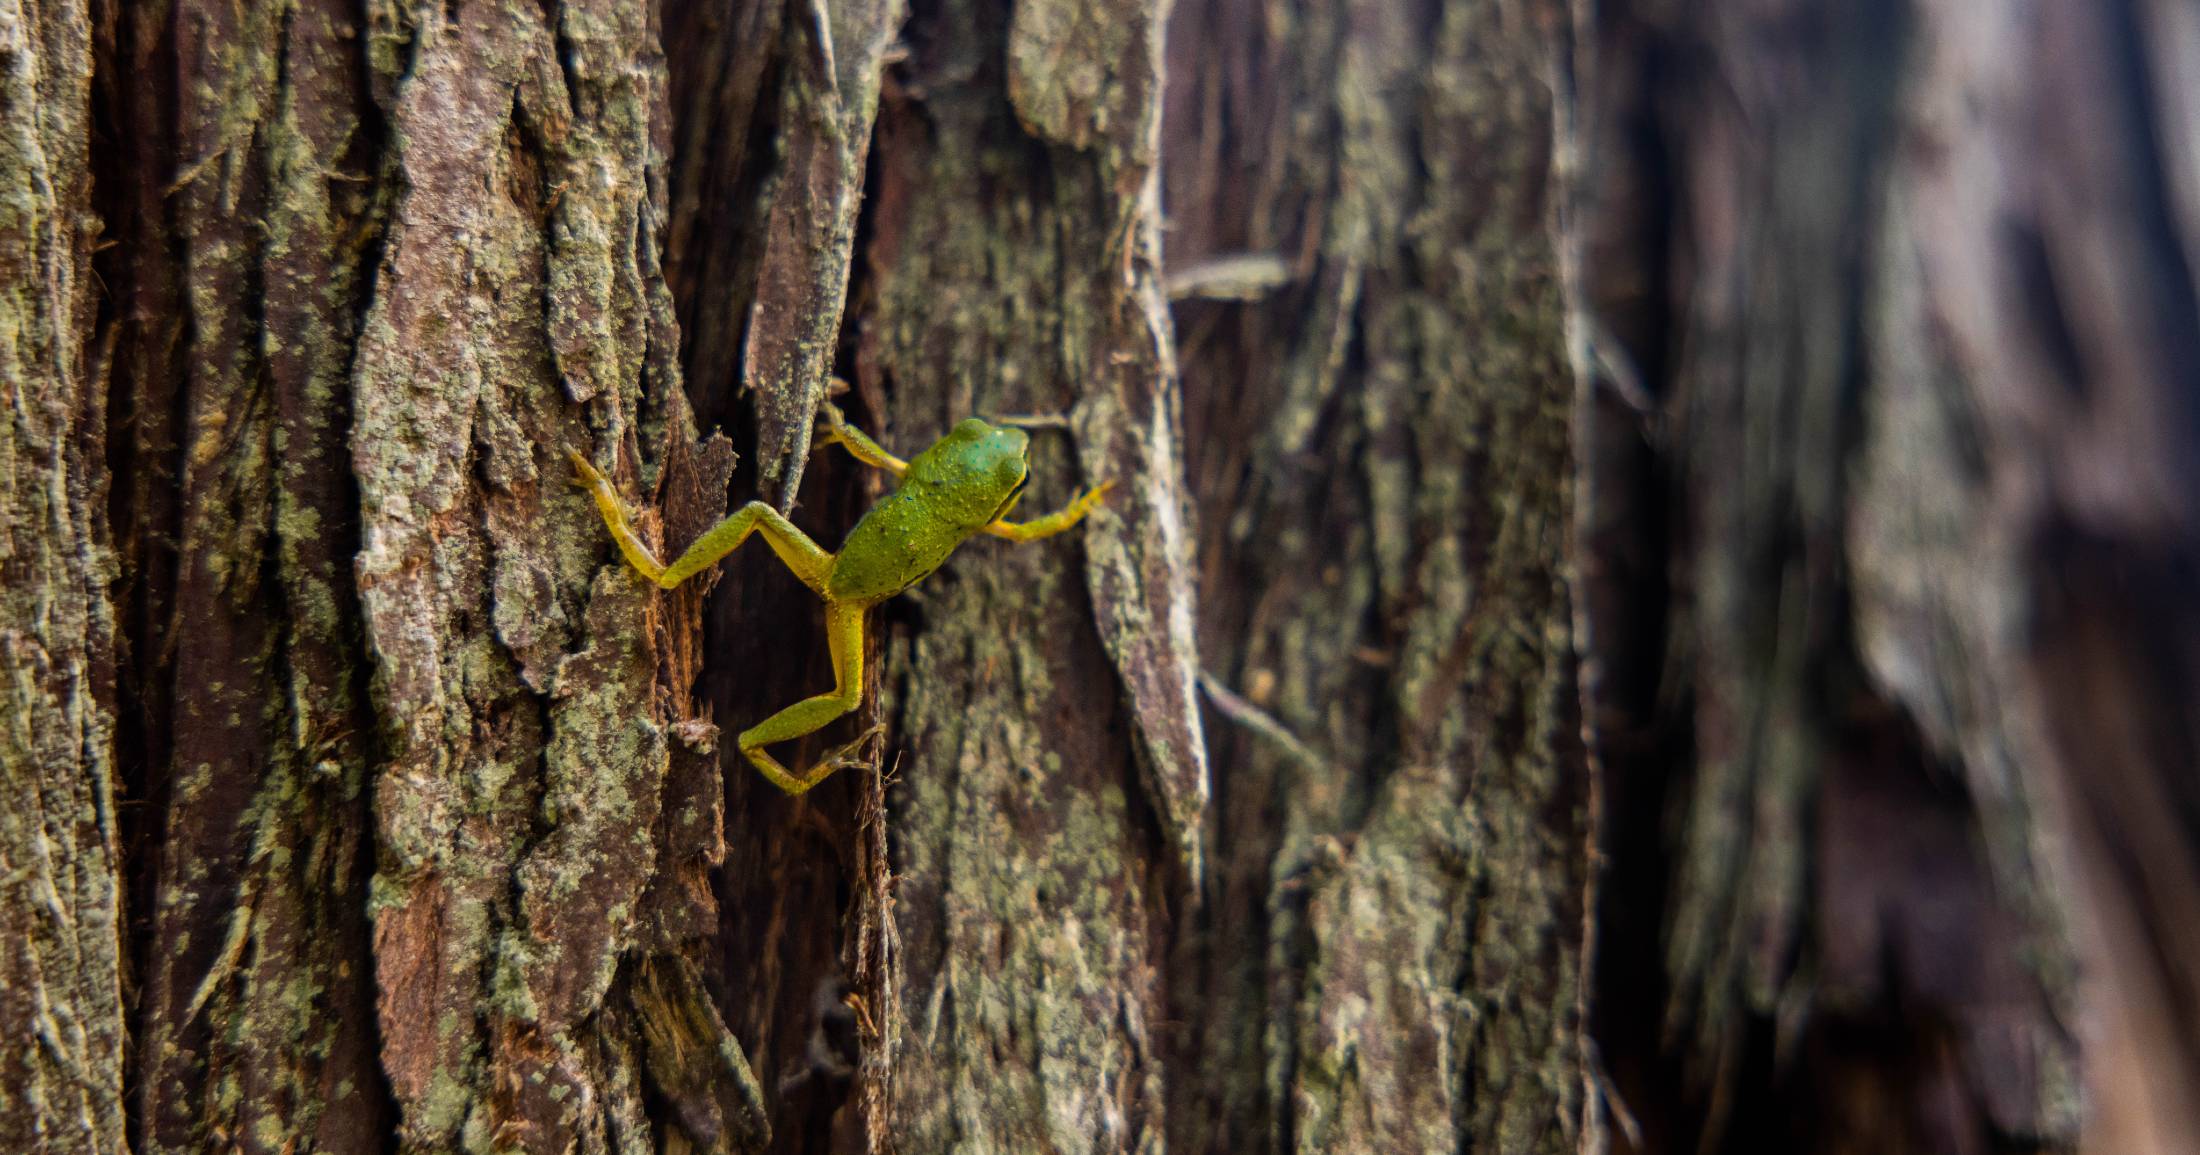 A small green frog holding onto the bark of a tree.